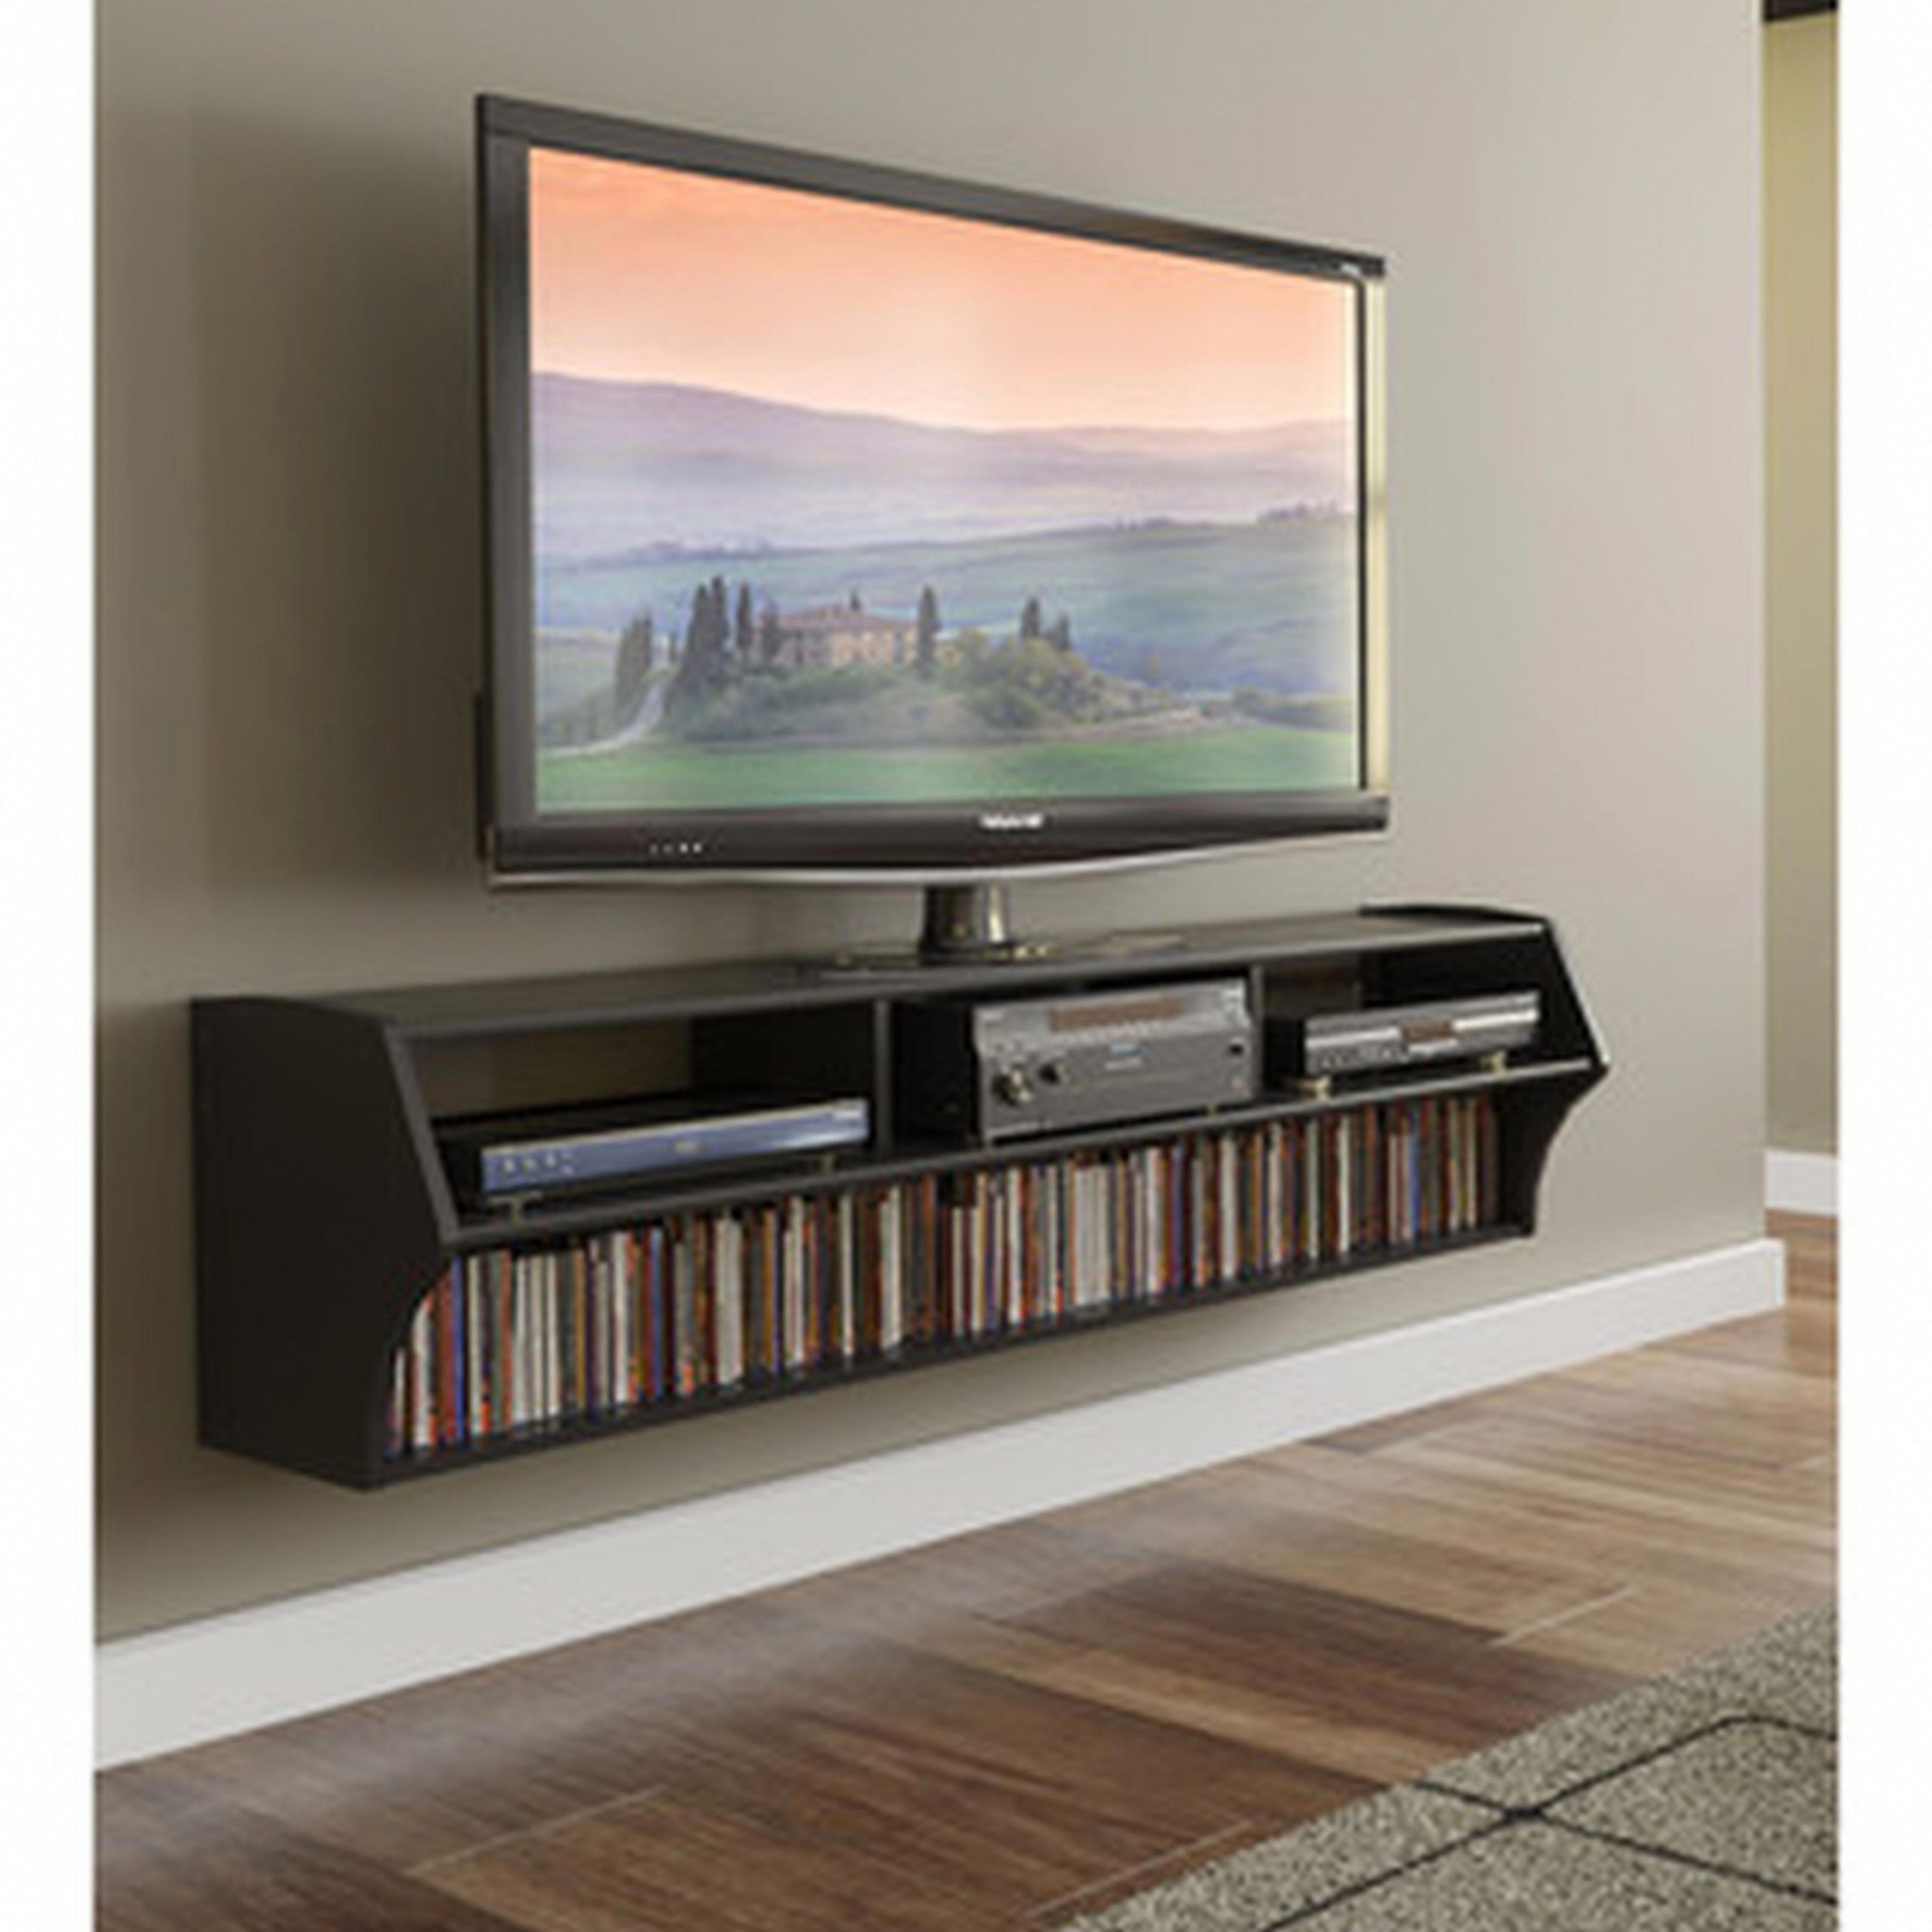 Cool Tv Stand Designs For Your Home #tvstand #homedecor # Within Funky Tv Stands (View 1 of 15)